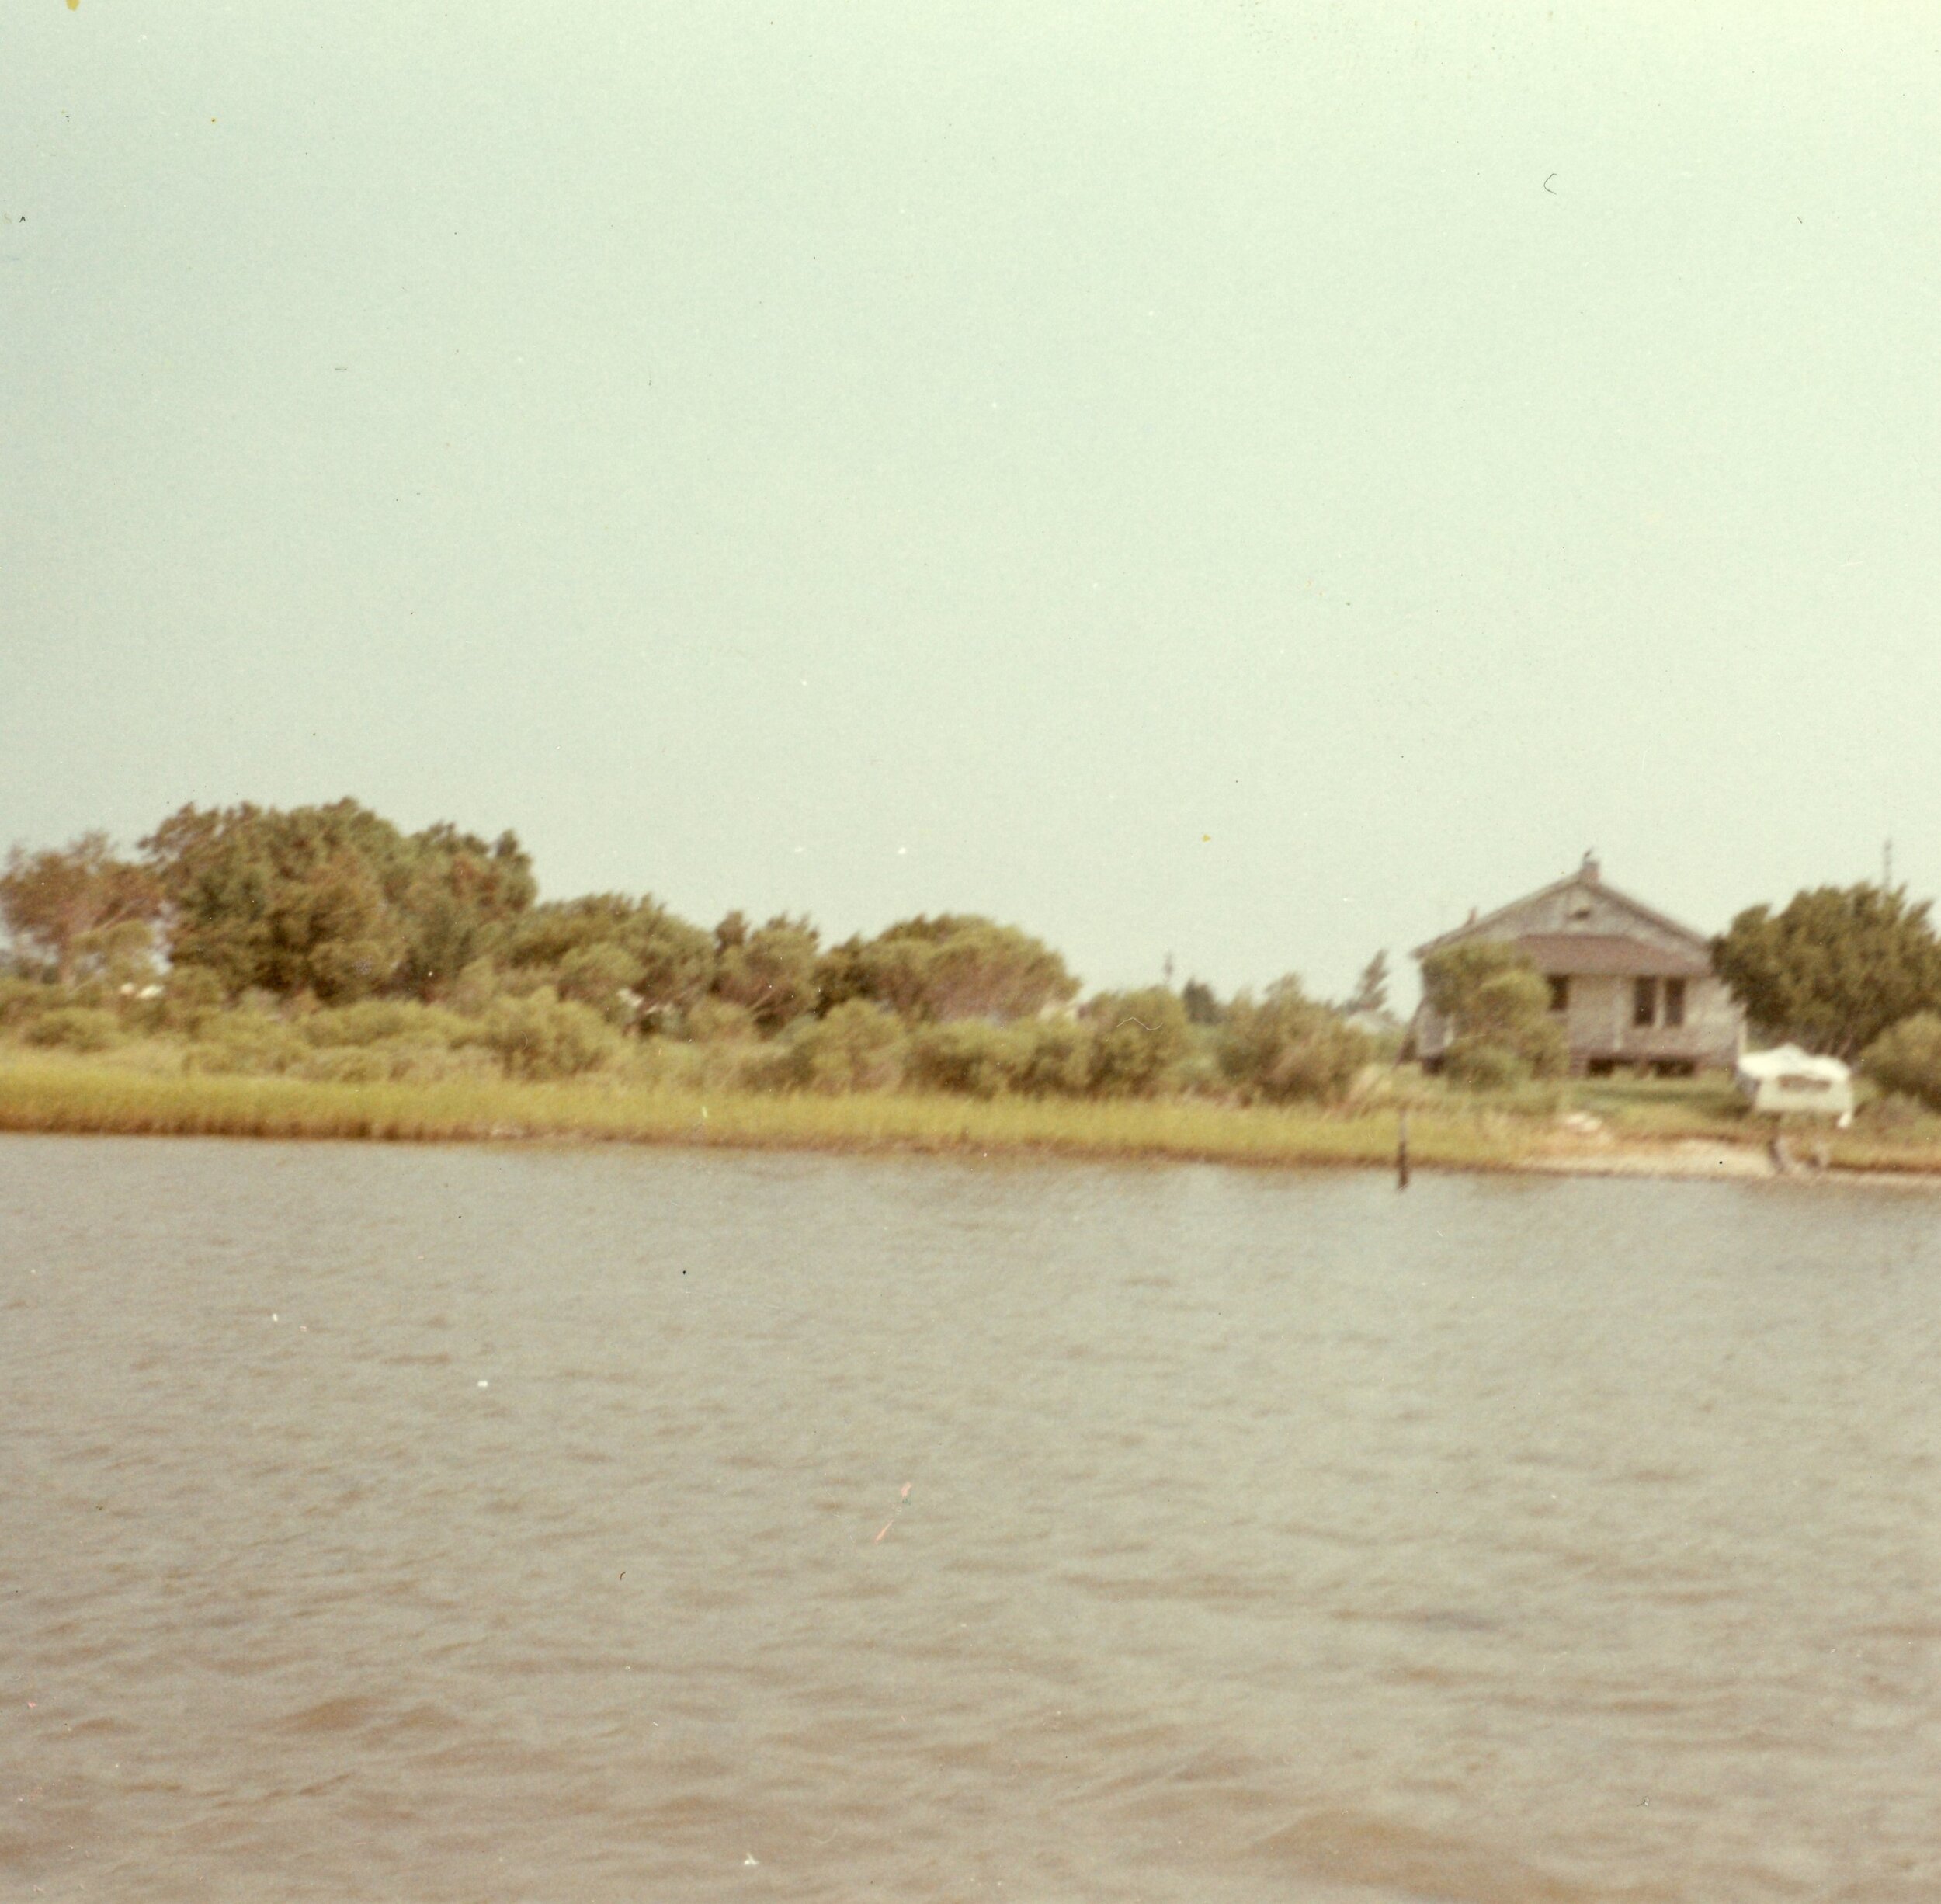 Photo taken from the water of David and Mamie’s lot on the left and Claude’s house on the right